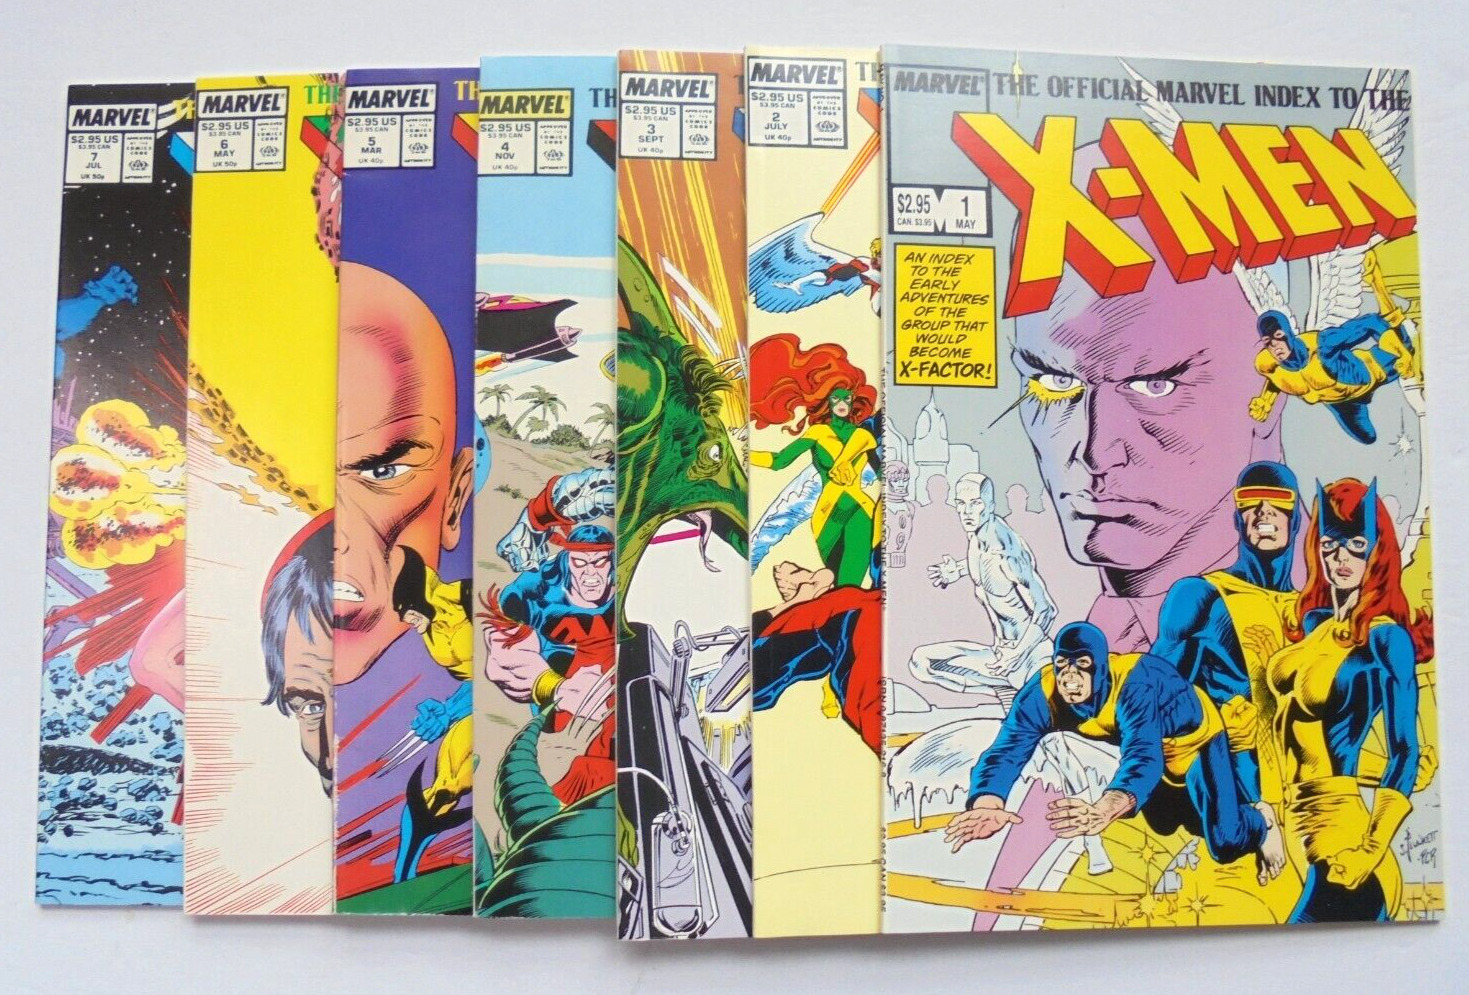 Official Marvel Index to the X-Men # 1-7 Full Run Comic Book Lot  ~ 1987 LOOK